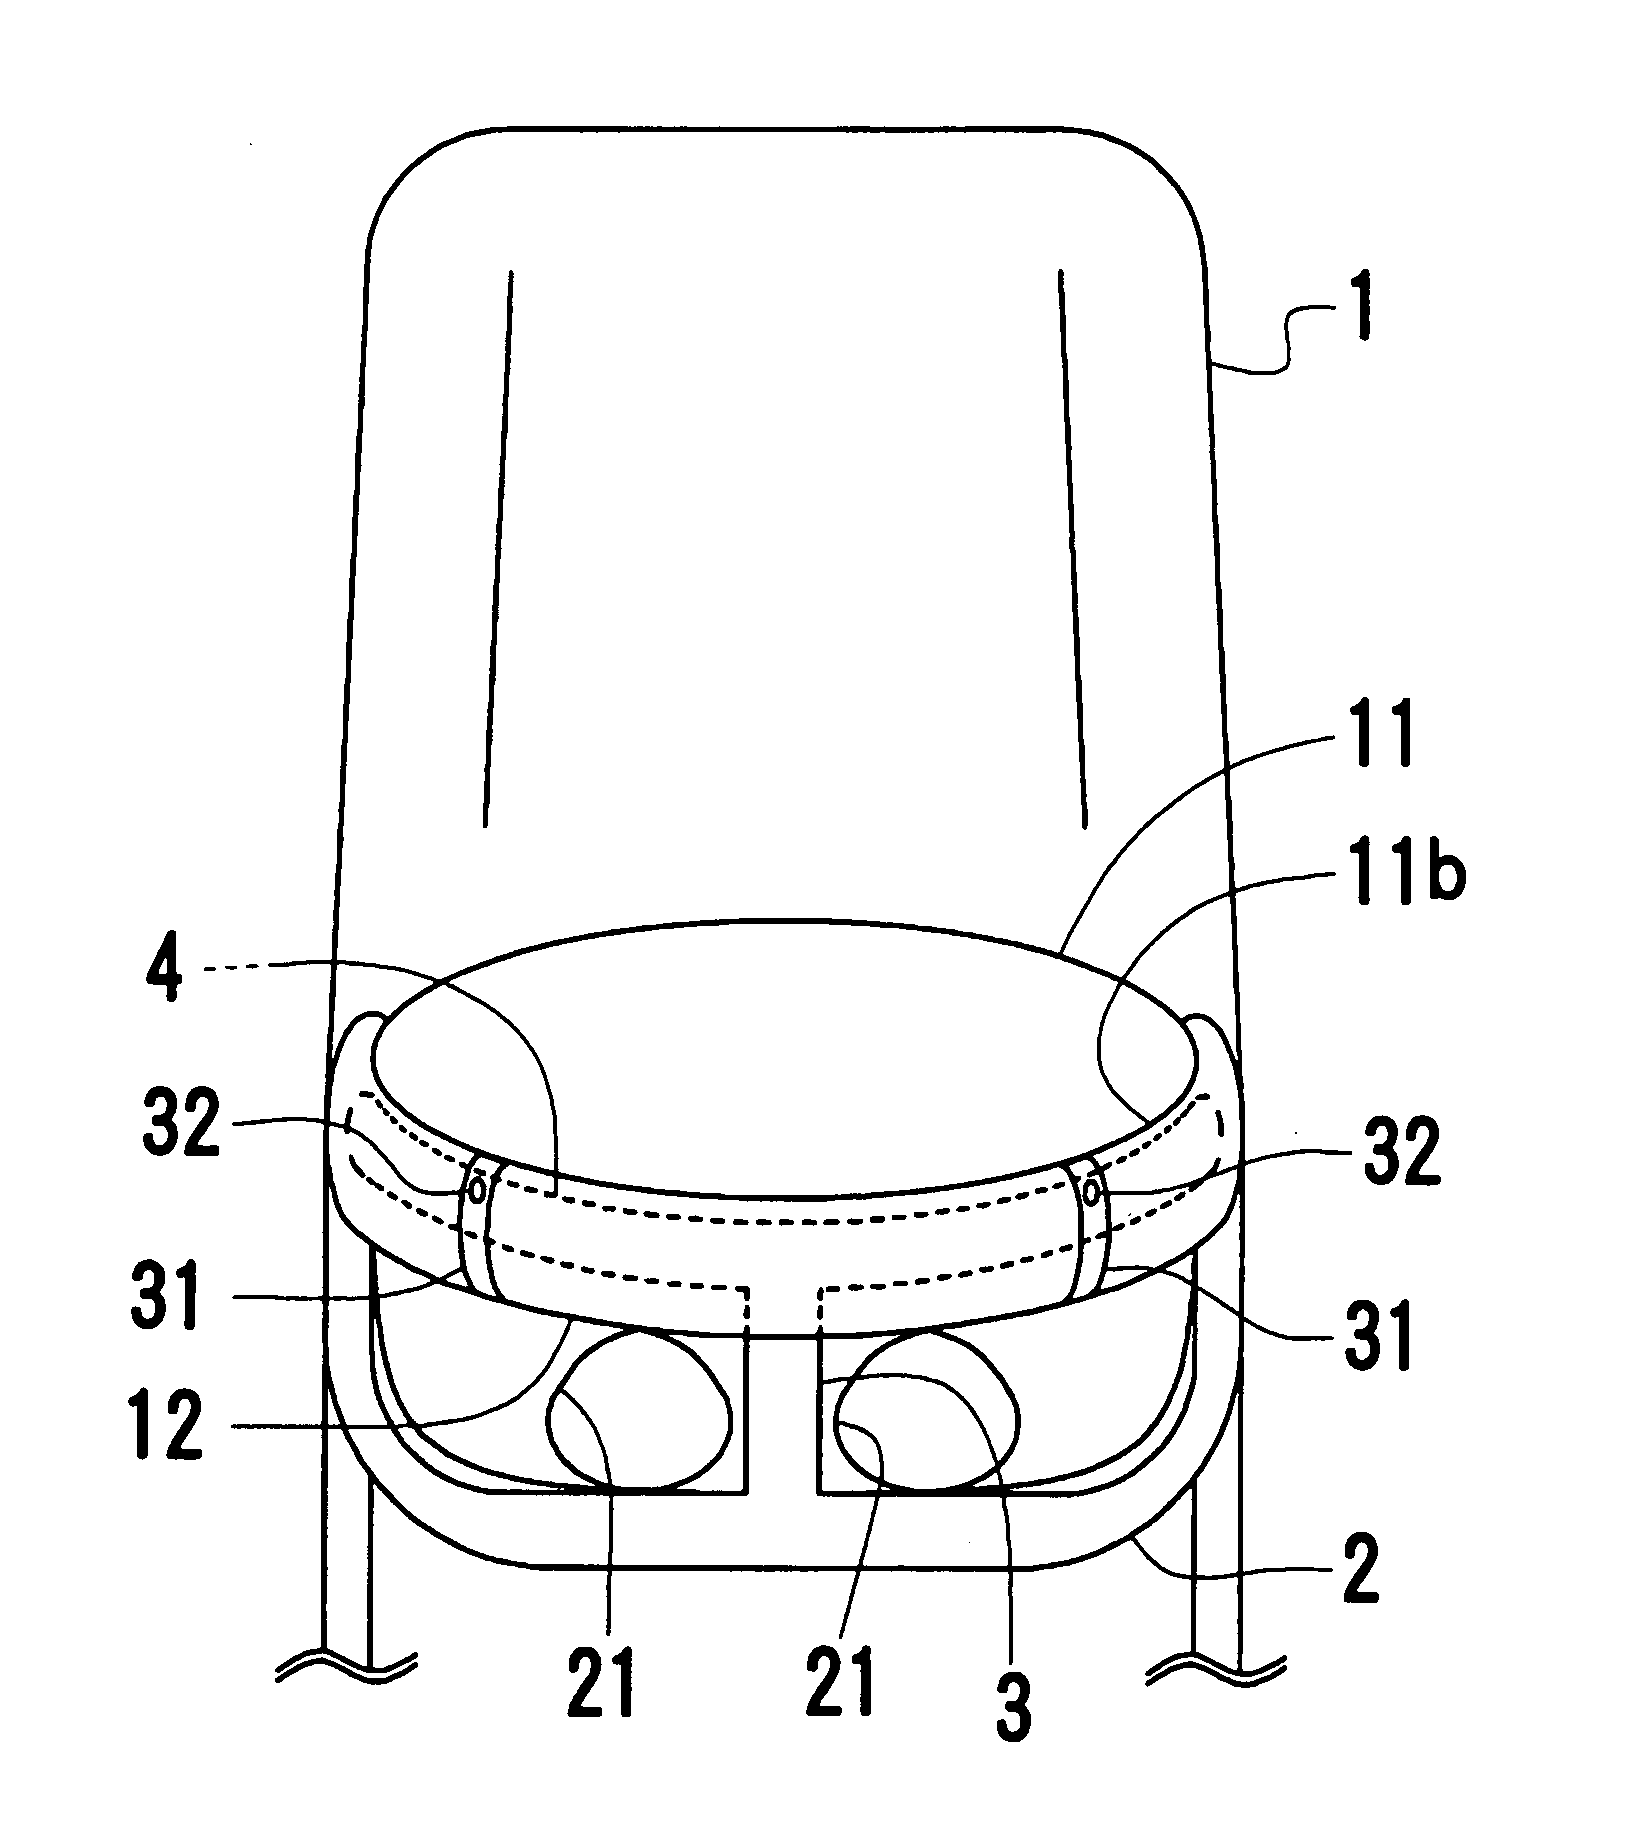 Cover for an infant seat